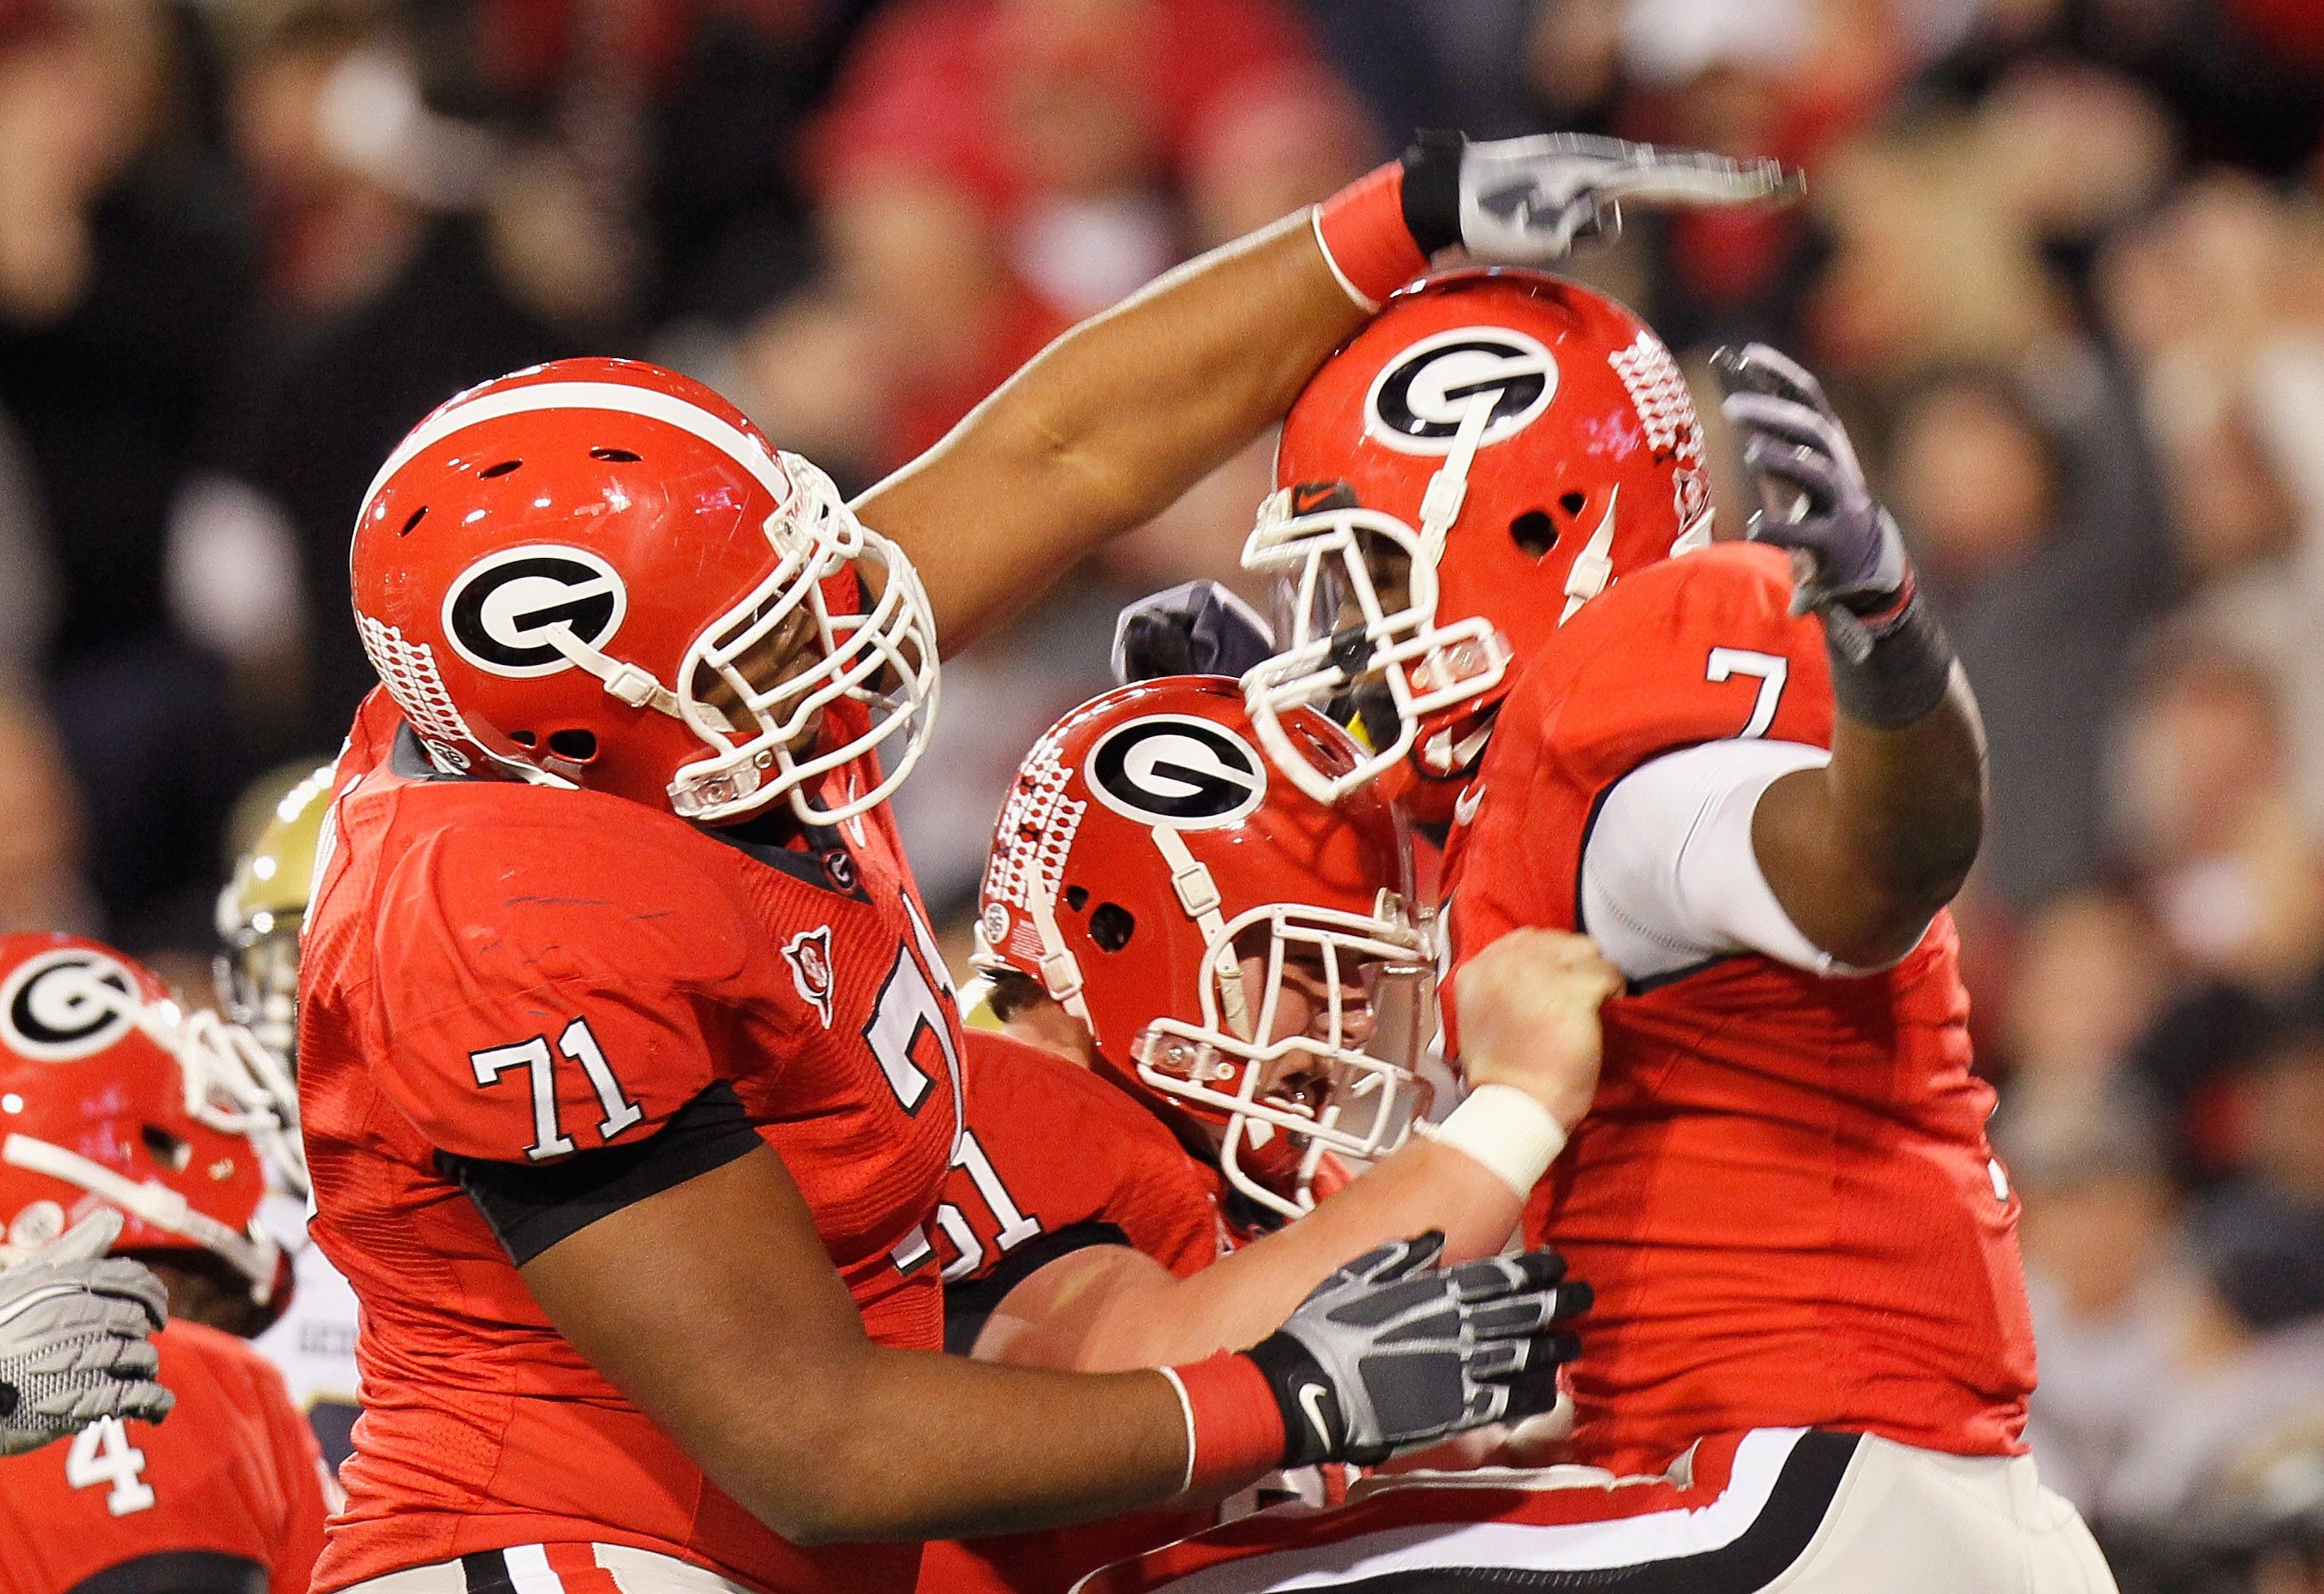 ATHENS, GA - NOVEMBER 27:  Cordy Glenn #71 and Ben Jones #61 of the Georgia Bulldogs celebrate with Orson Charles #7 after Charles touchdown against the Georgia Tech Yellow Jackets at Sanford Stadium on November 27, 2010 in Athens, Georgia.  (Photo by Kev